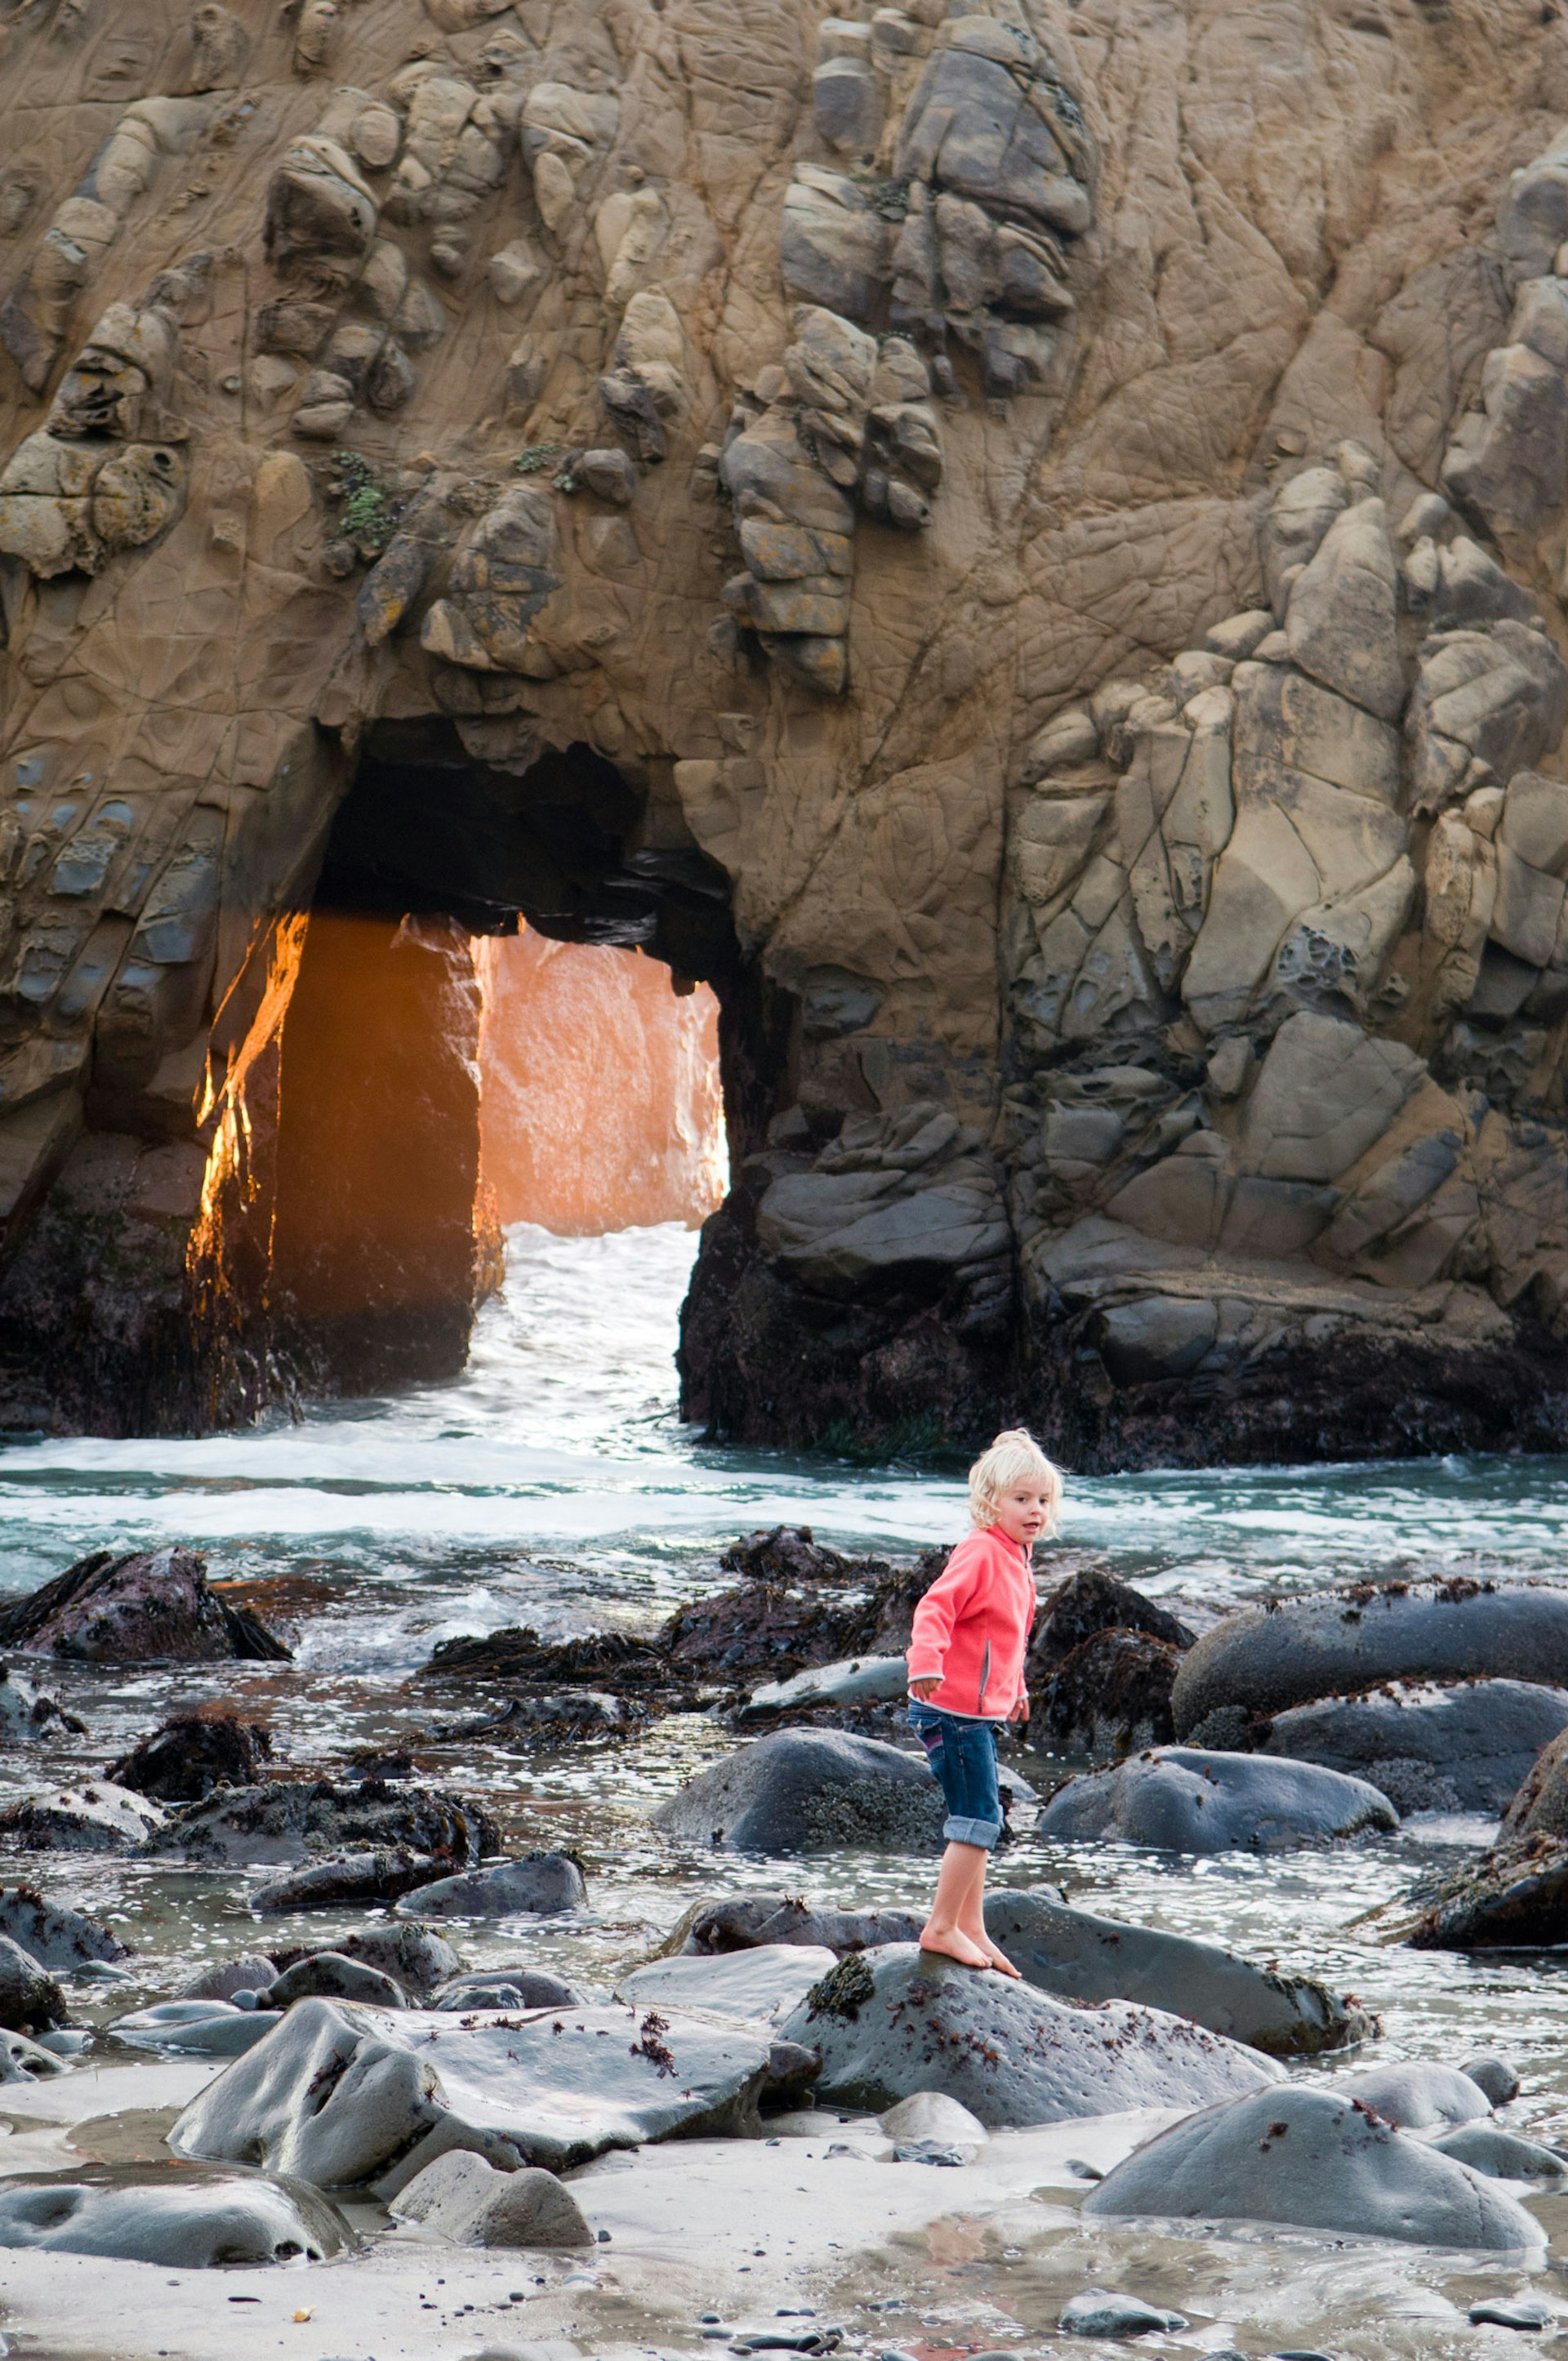 A little girl in a pink coat plays on a rocky coast line with a stone cave behind her